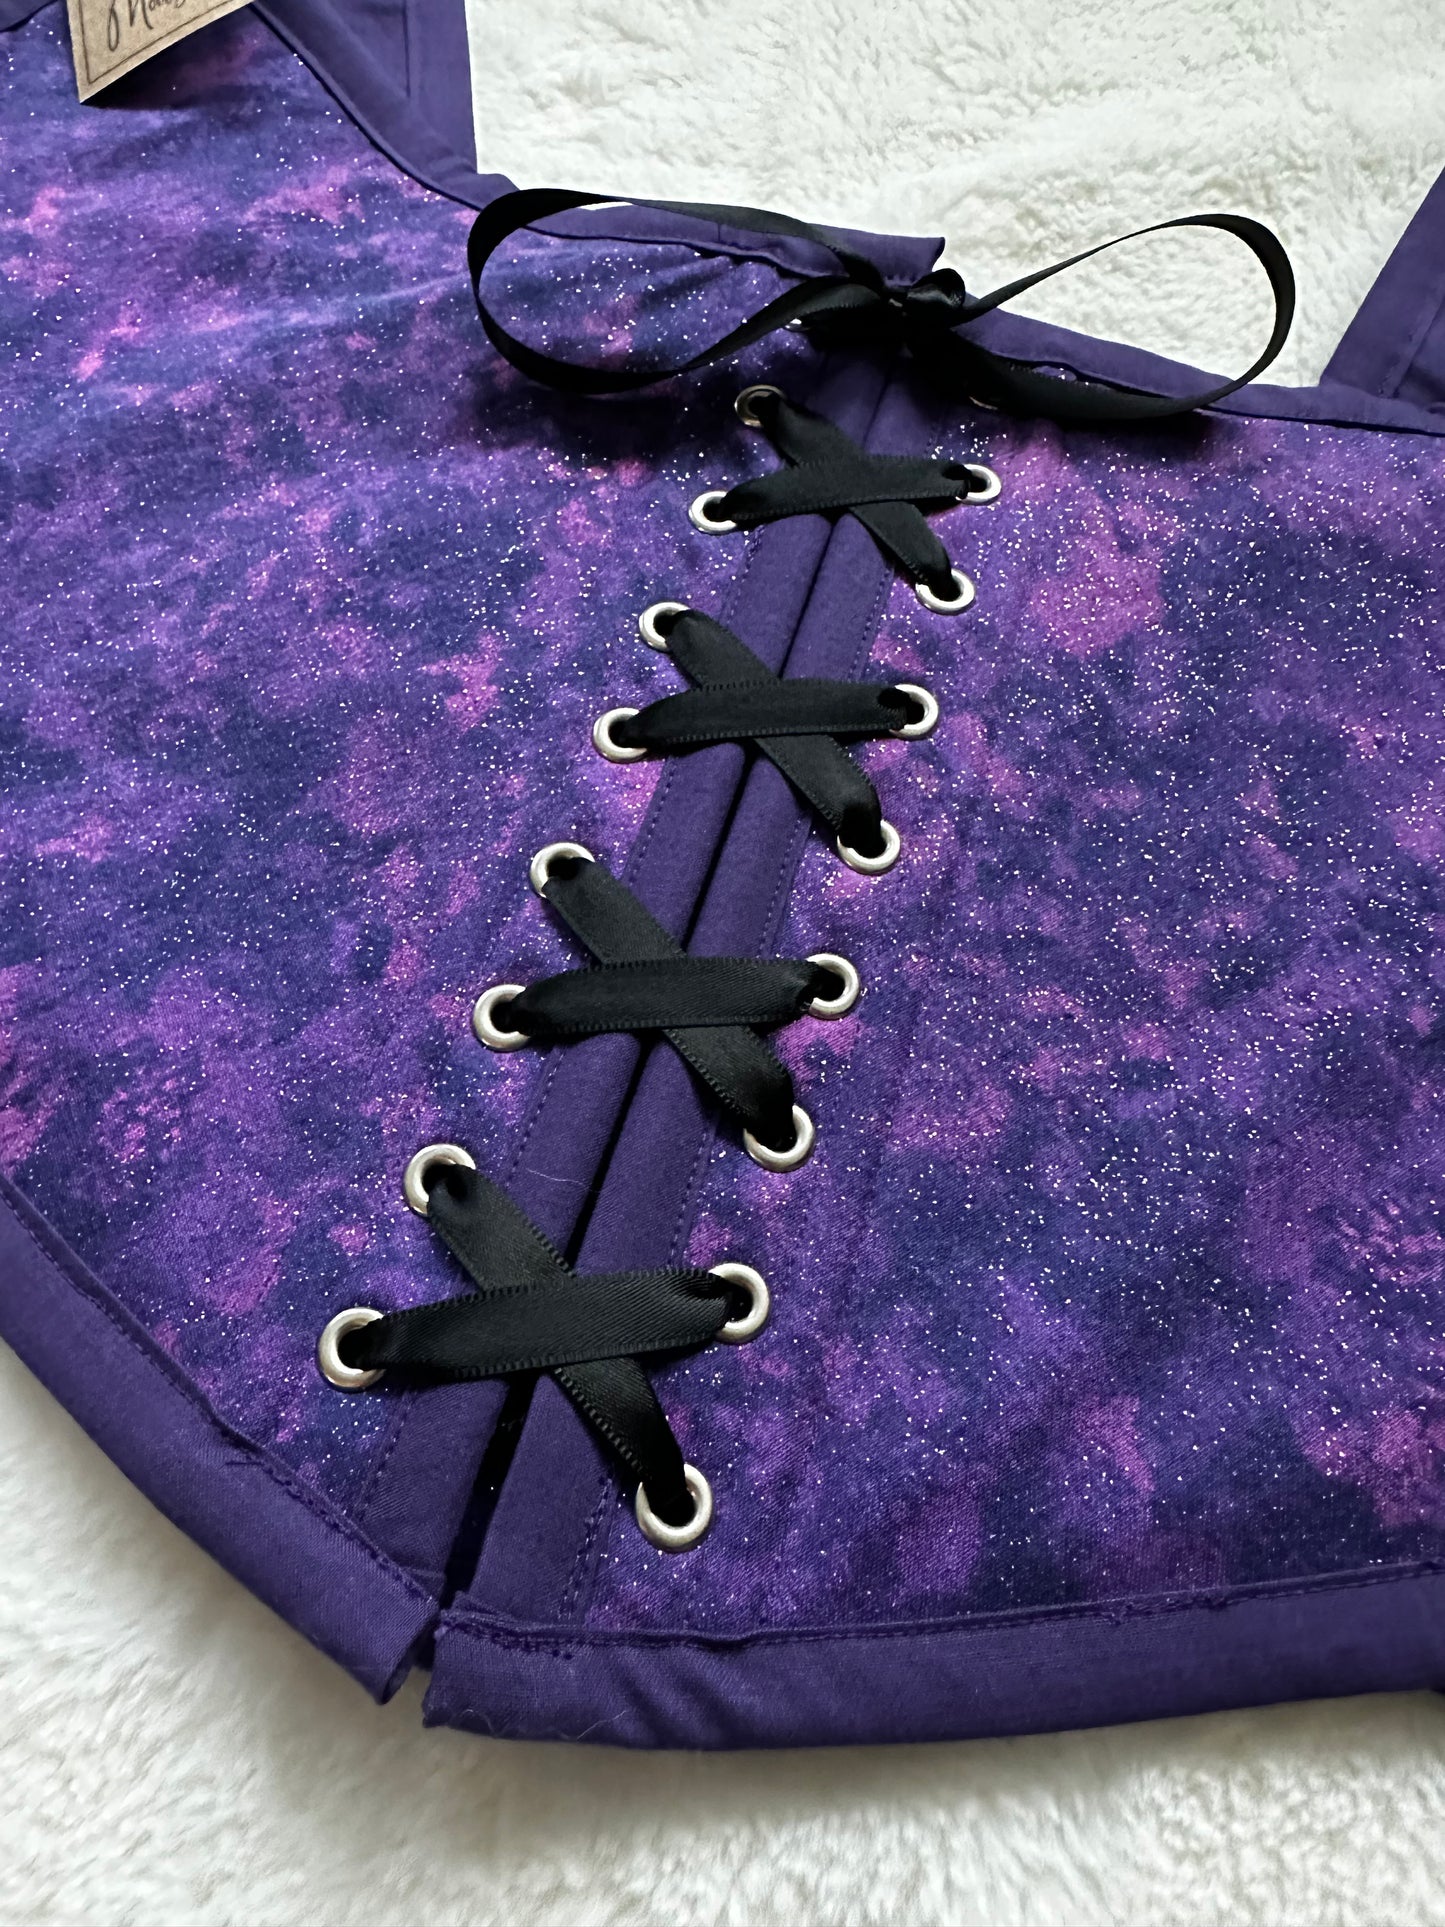 Close up of renaissance bodice in purple and pink celestial print. Purple bias border around edges, black ribbon down center with silver grommets. Bodice is laying on white fluffy blanket.